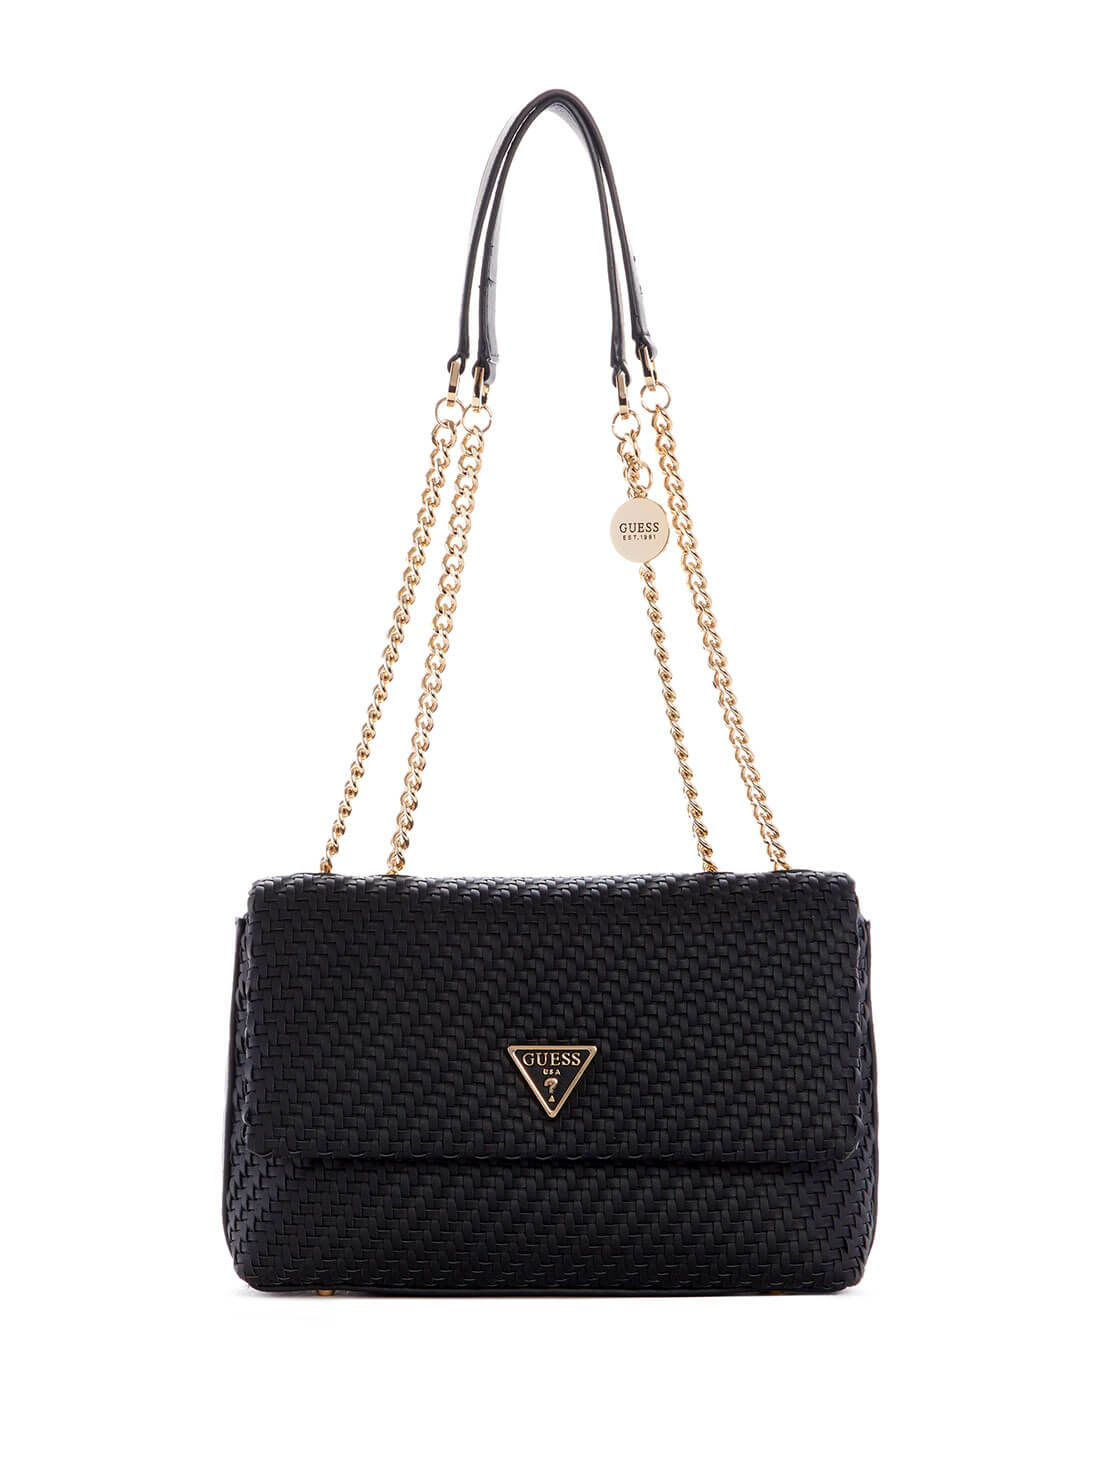 GUESS Womens Black Woven Hassie Convertible Crossbody VG839721 Front View